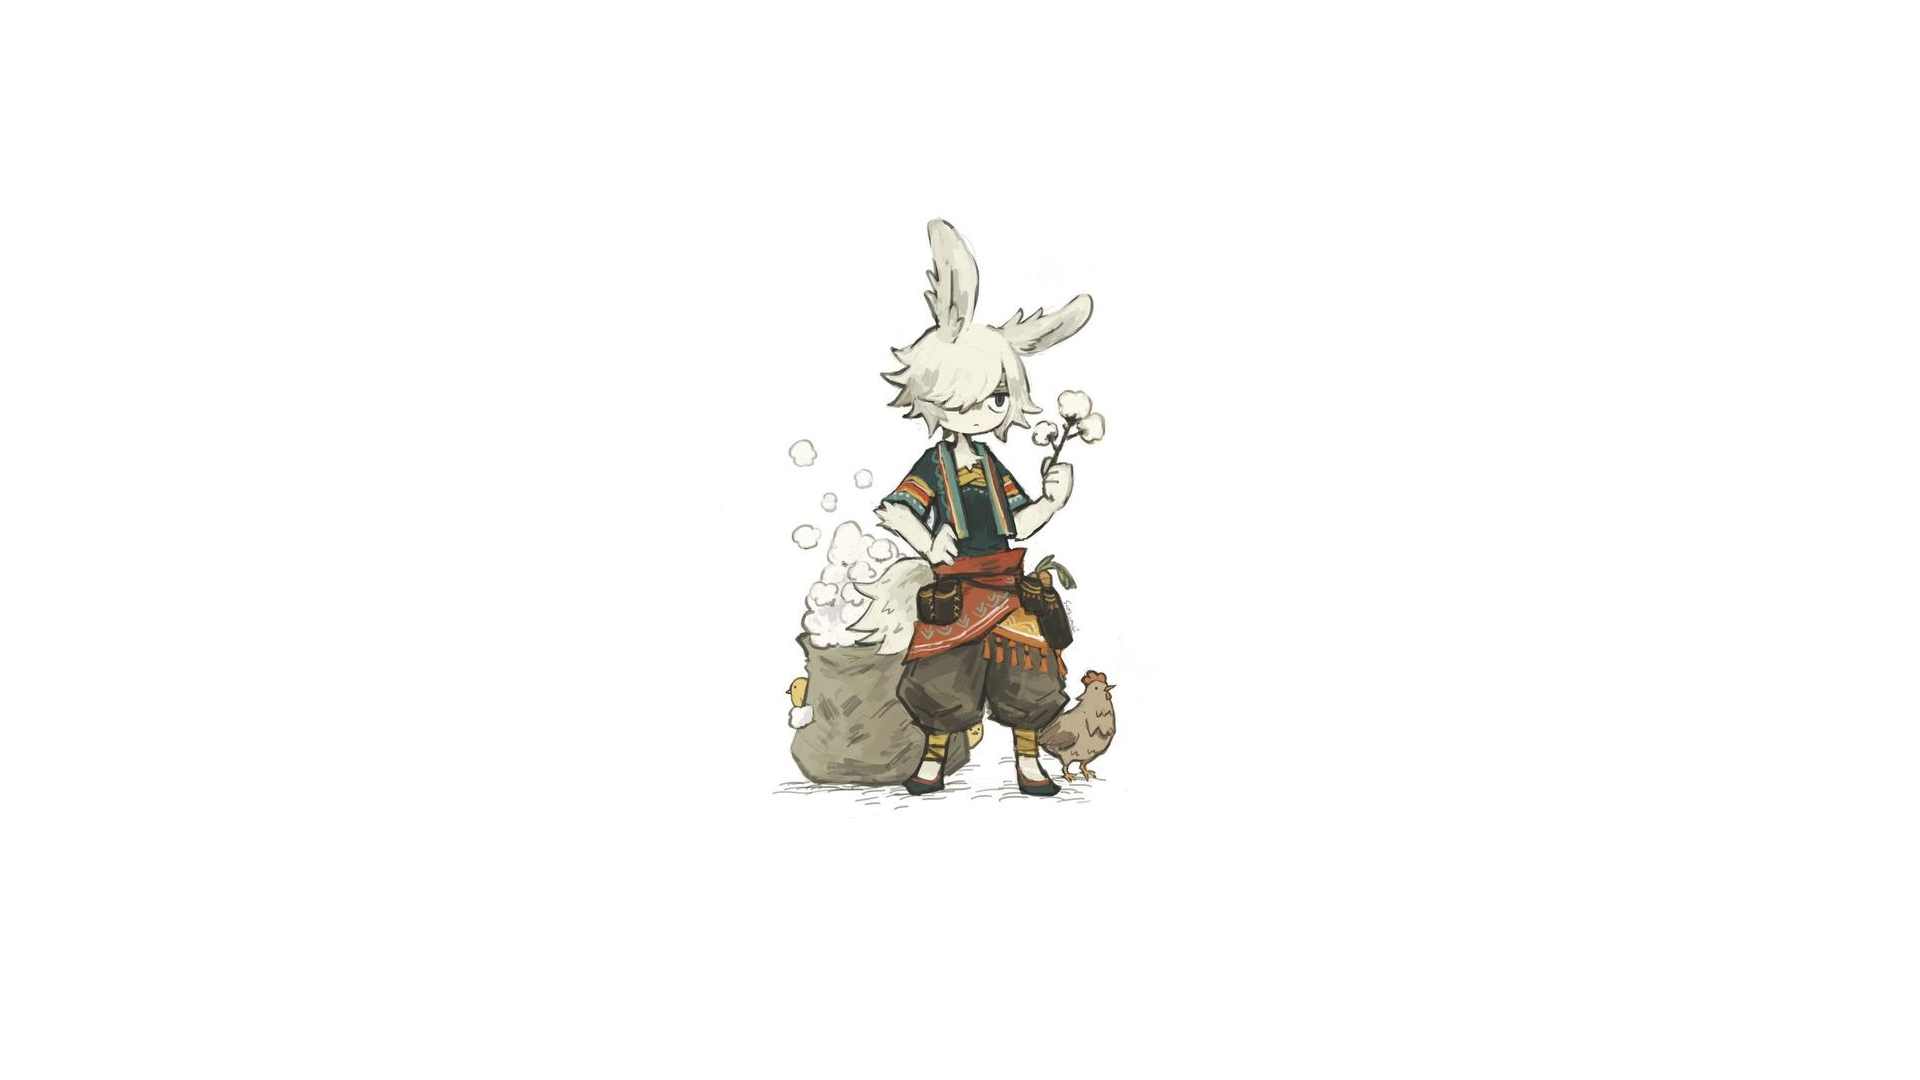 Rabbits Bunny Ears Chickens Cotton Tail White Hair Bag White Background Furry Anthro 1920x1080